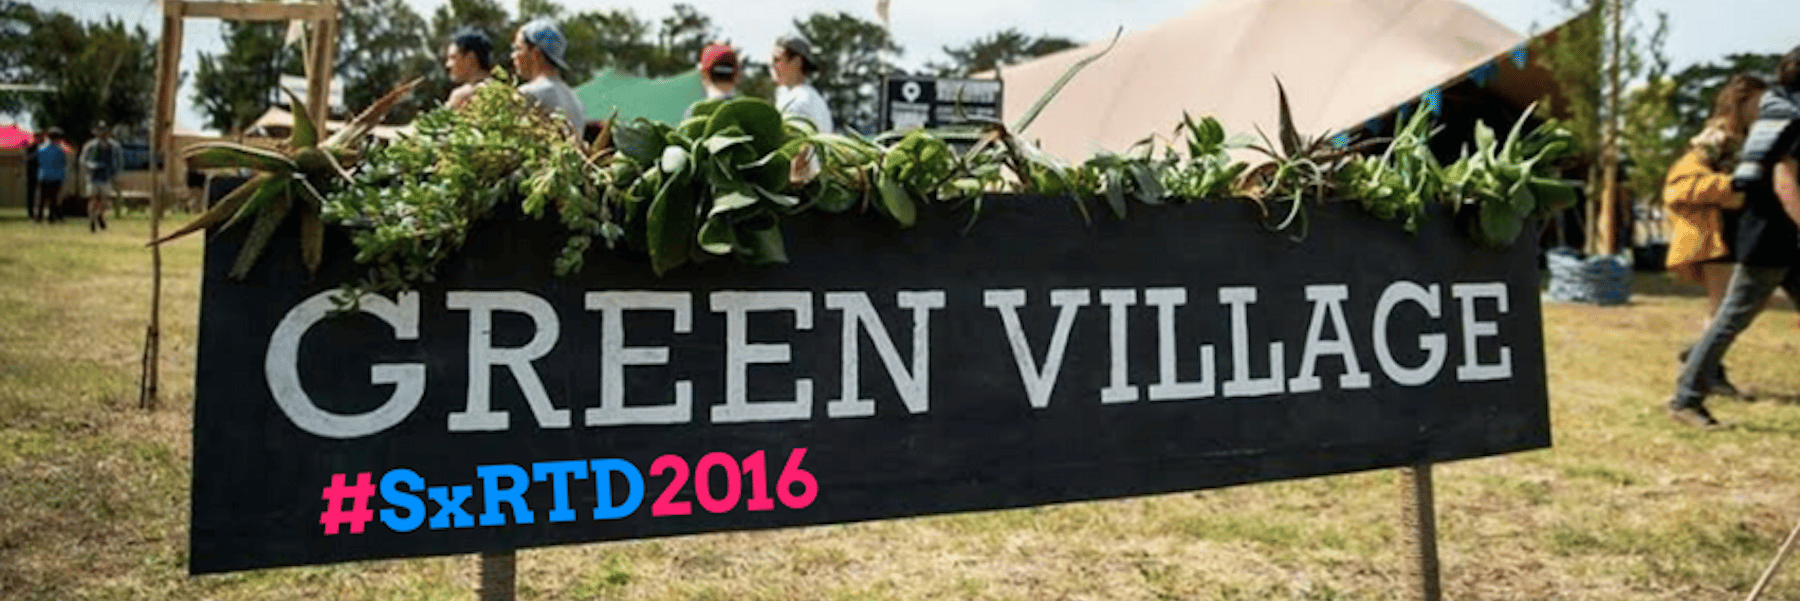 A week with Anne, Events Intern at Greenpop, during Rocking the Daisies